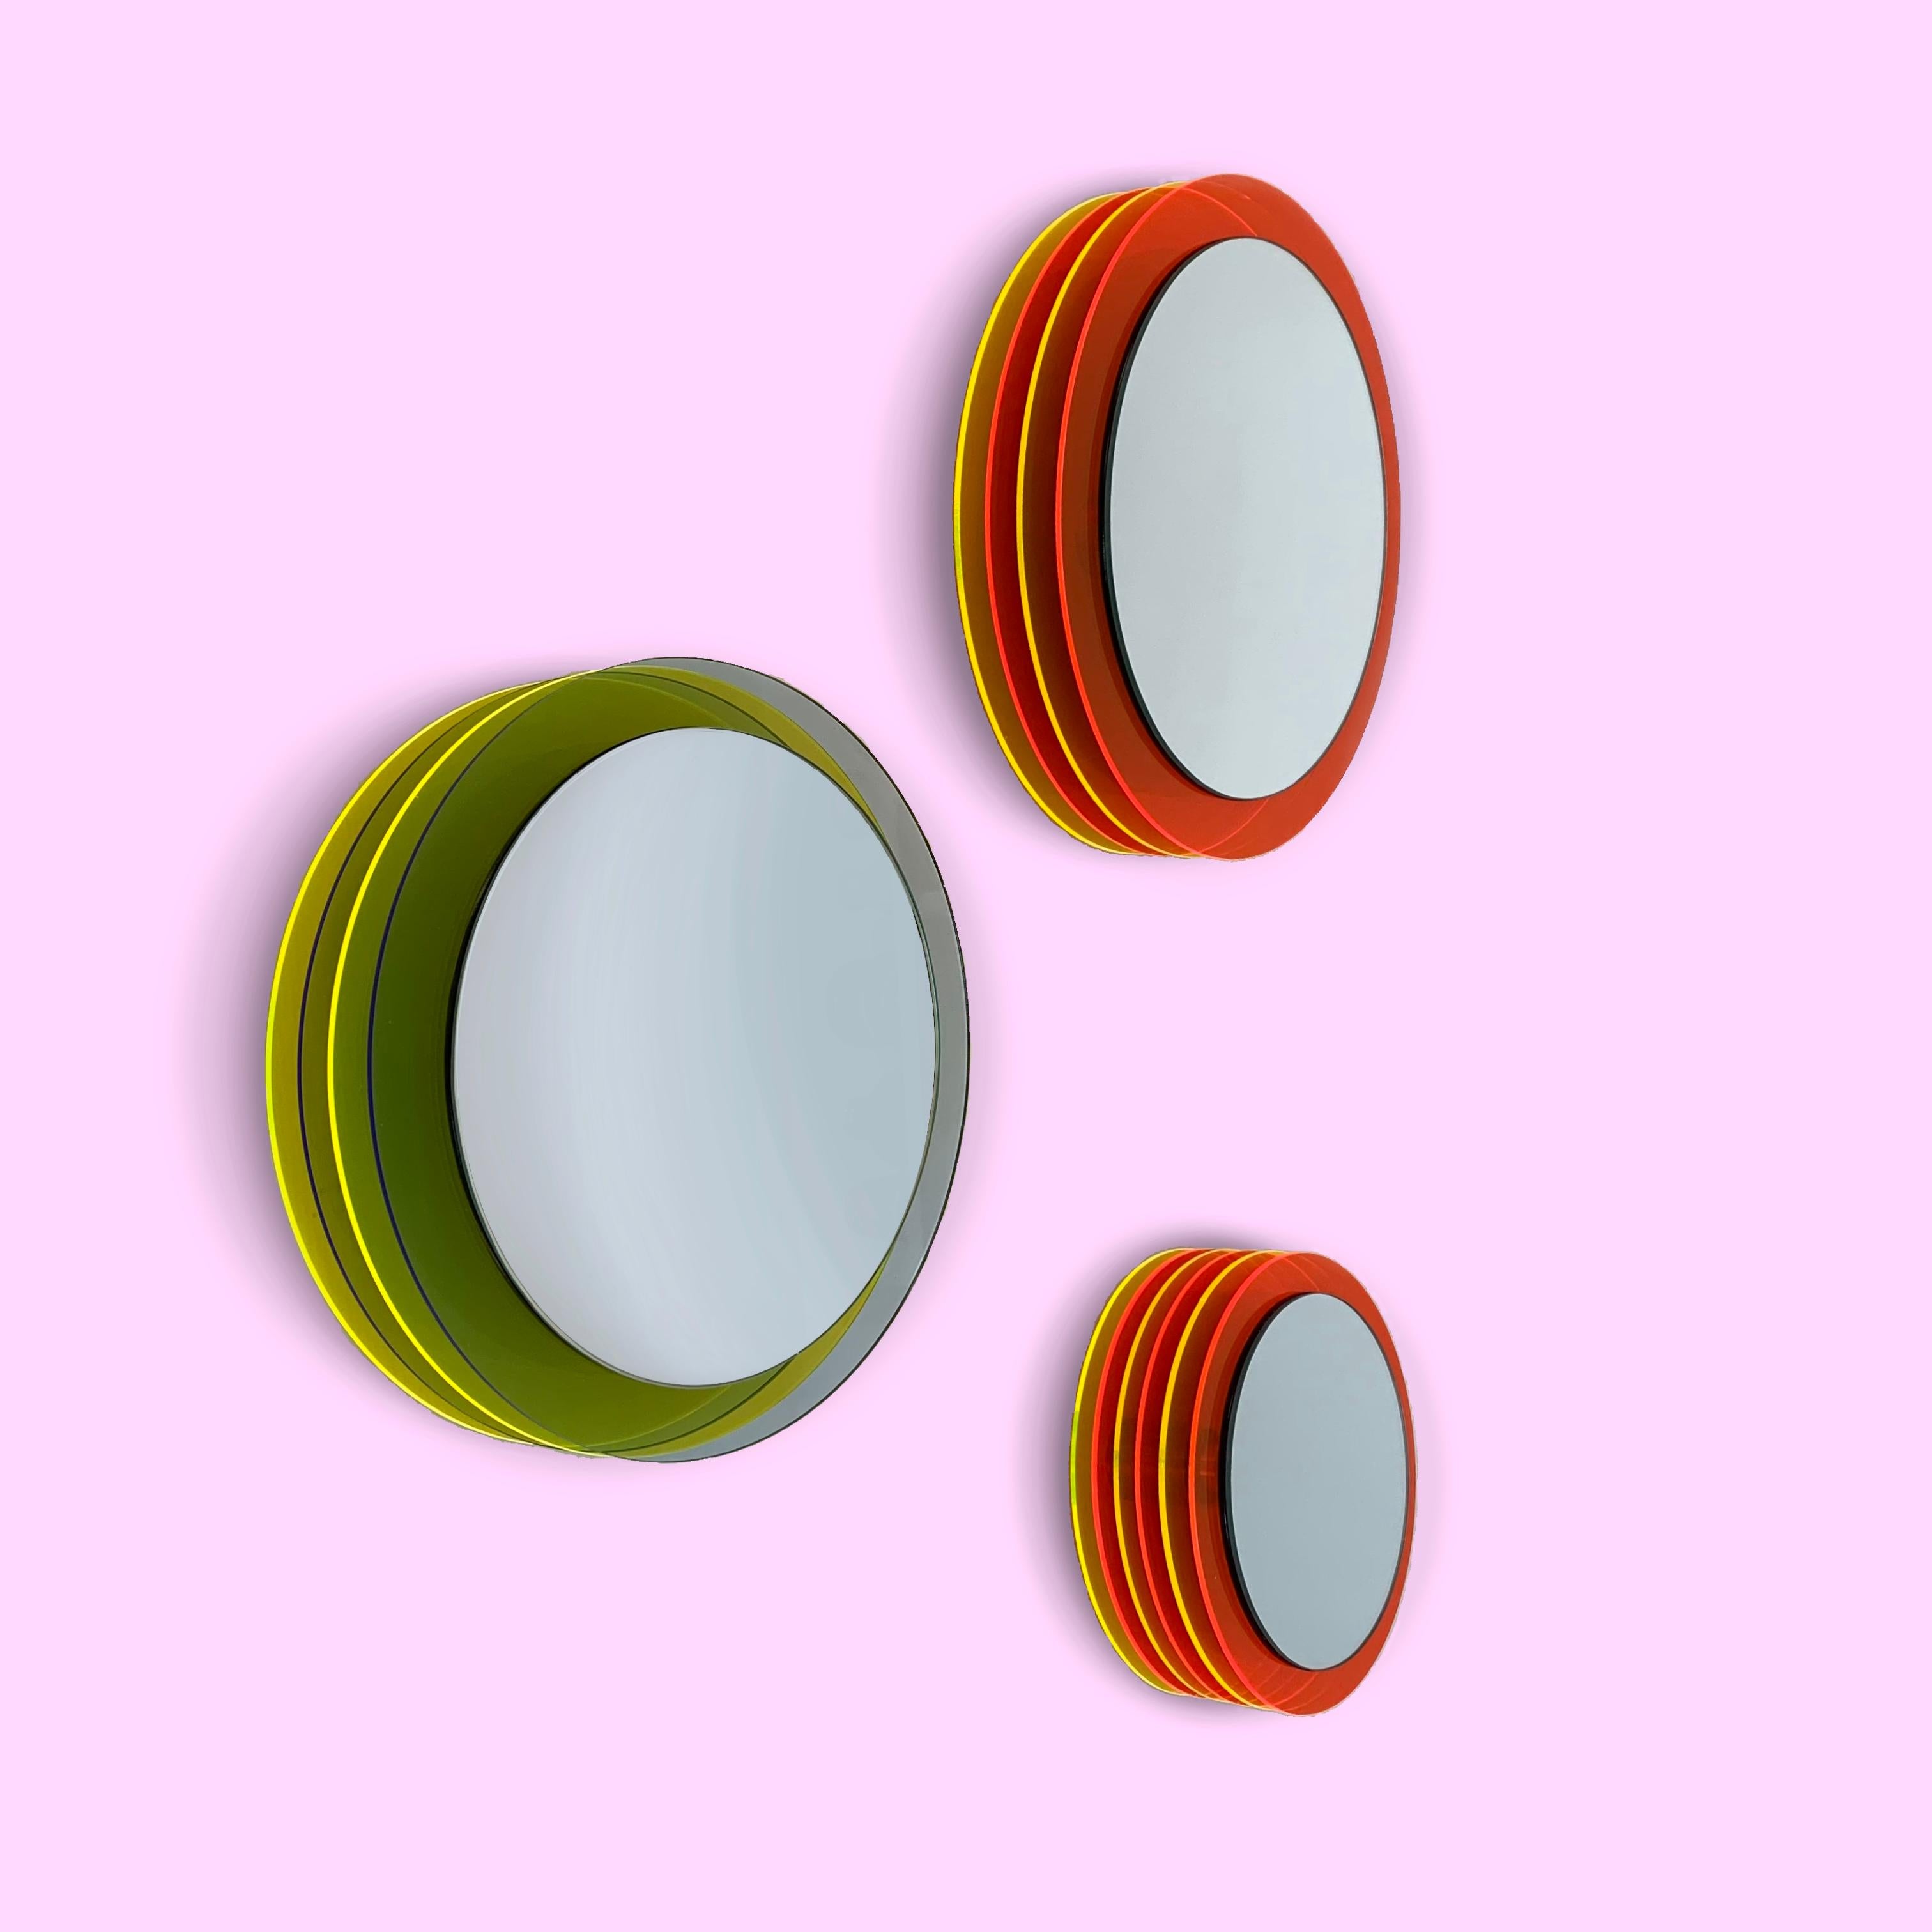 Magnets Set Anbito, Wall Mirrors with Plexiglass, Design Sculpture by Andreas Berlin For Sale